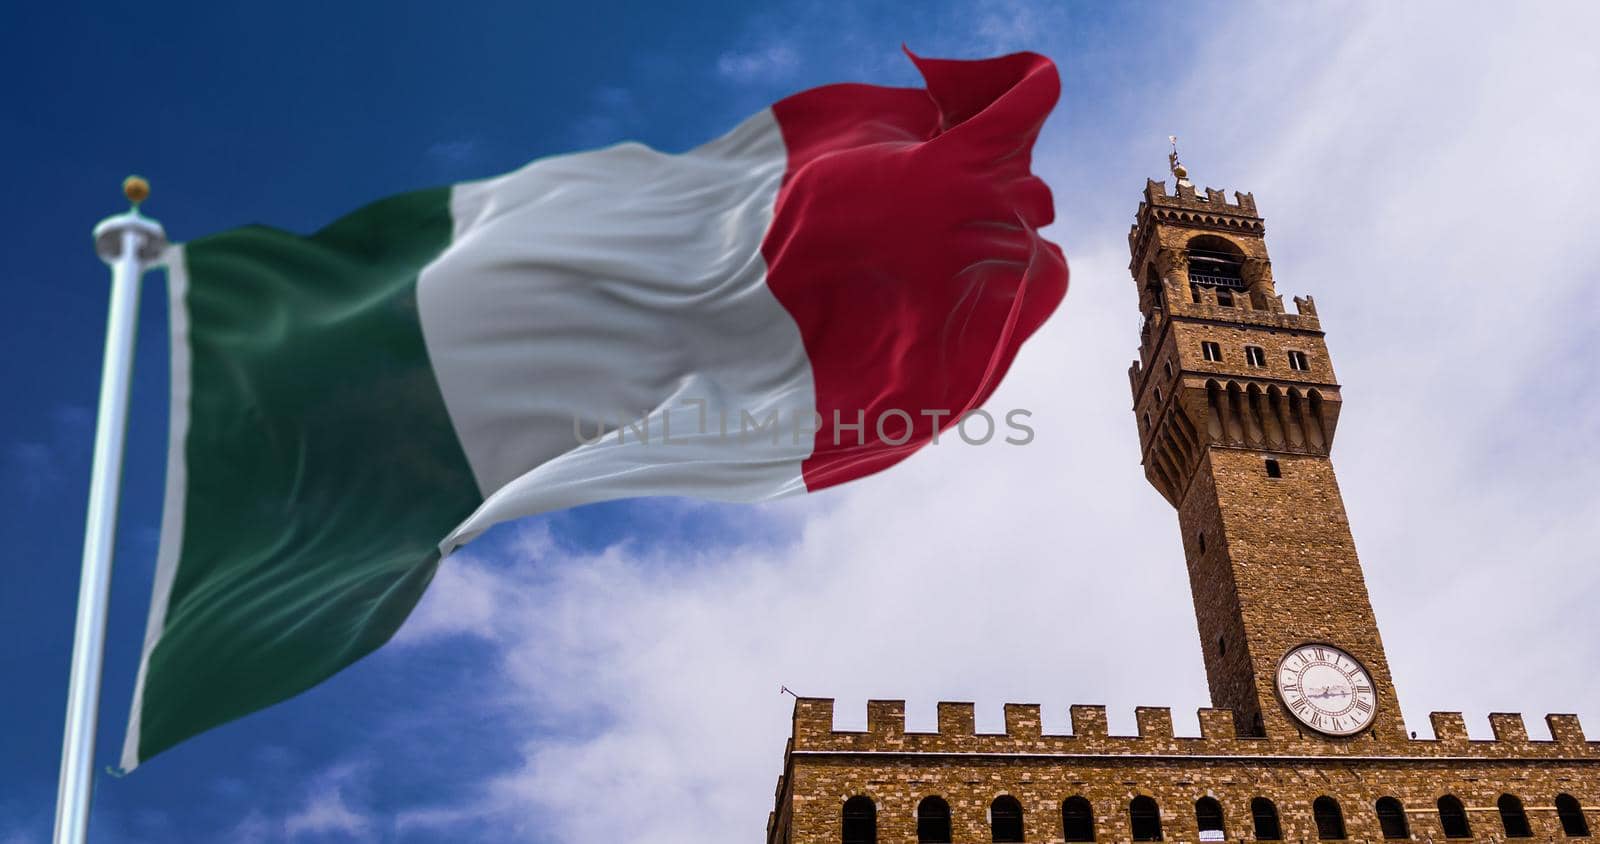 The Italian flag waving in the wind with the tower of Palazzo Vecchio in Florence in the background by rarrarorro